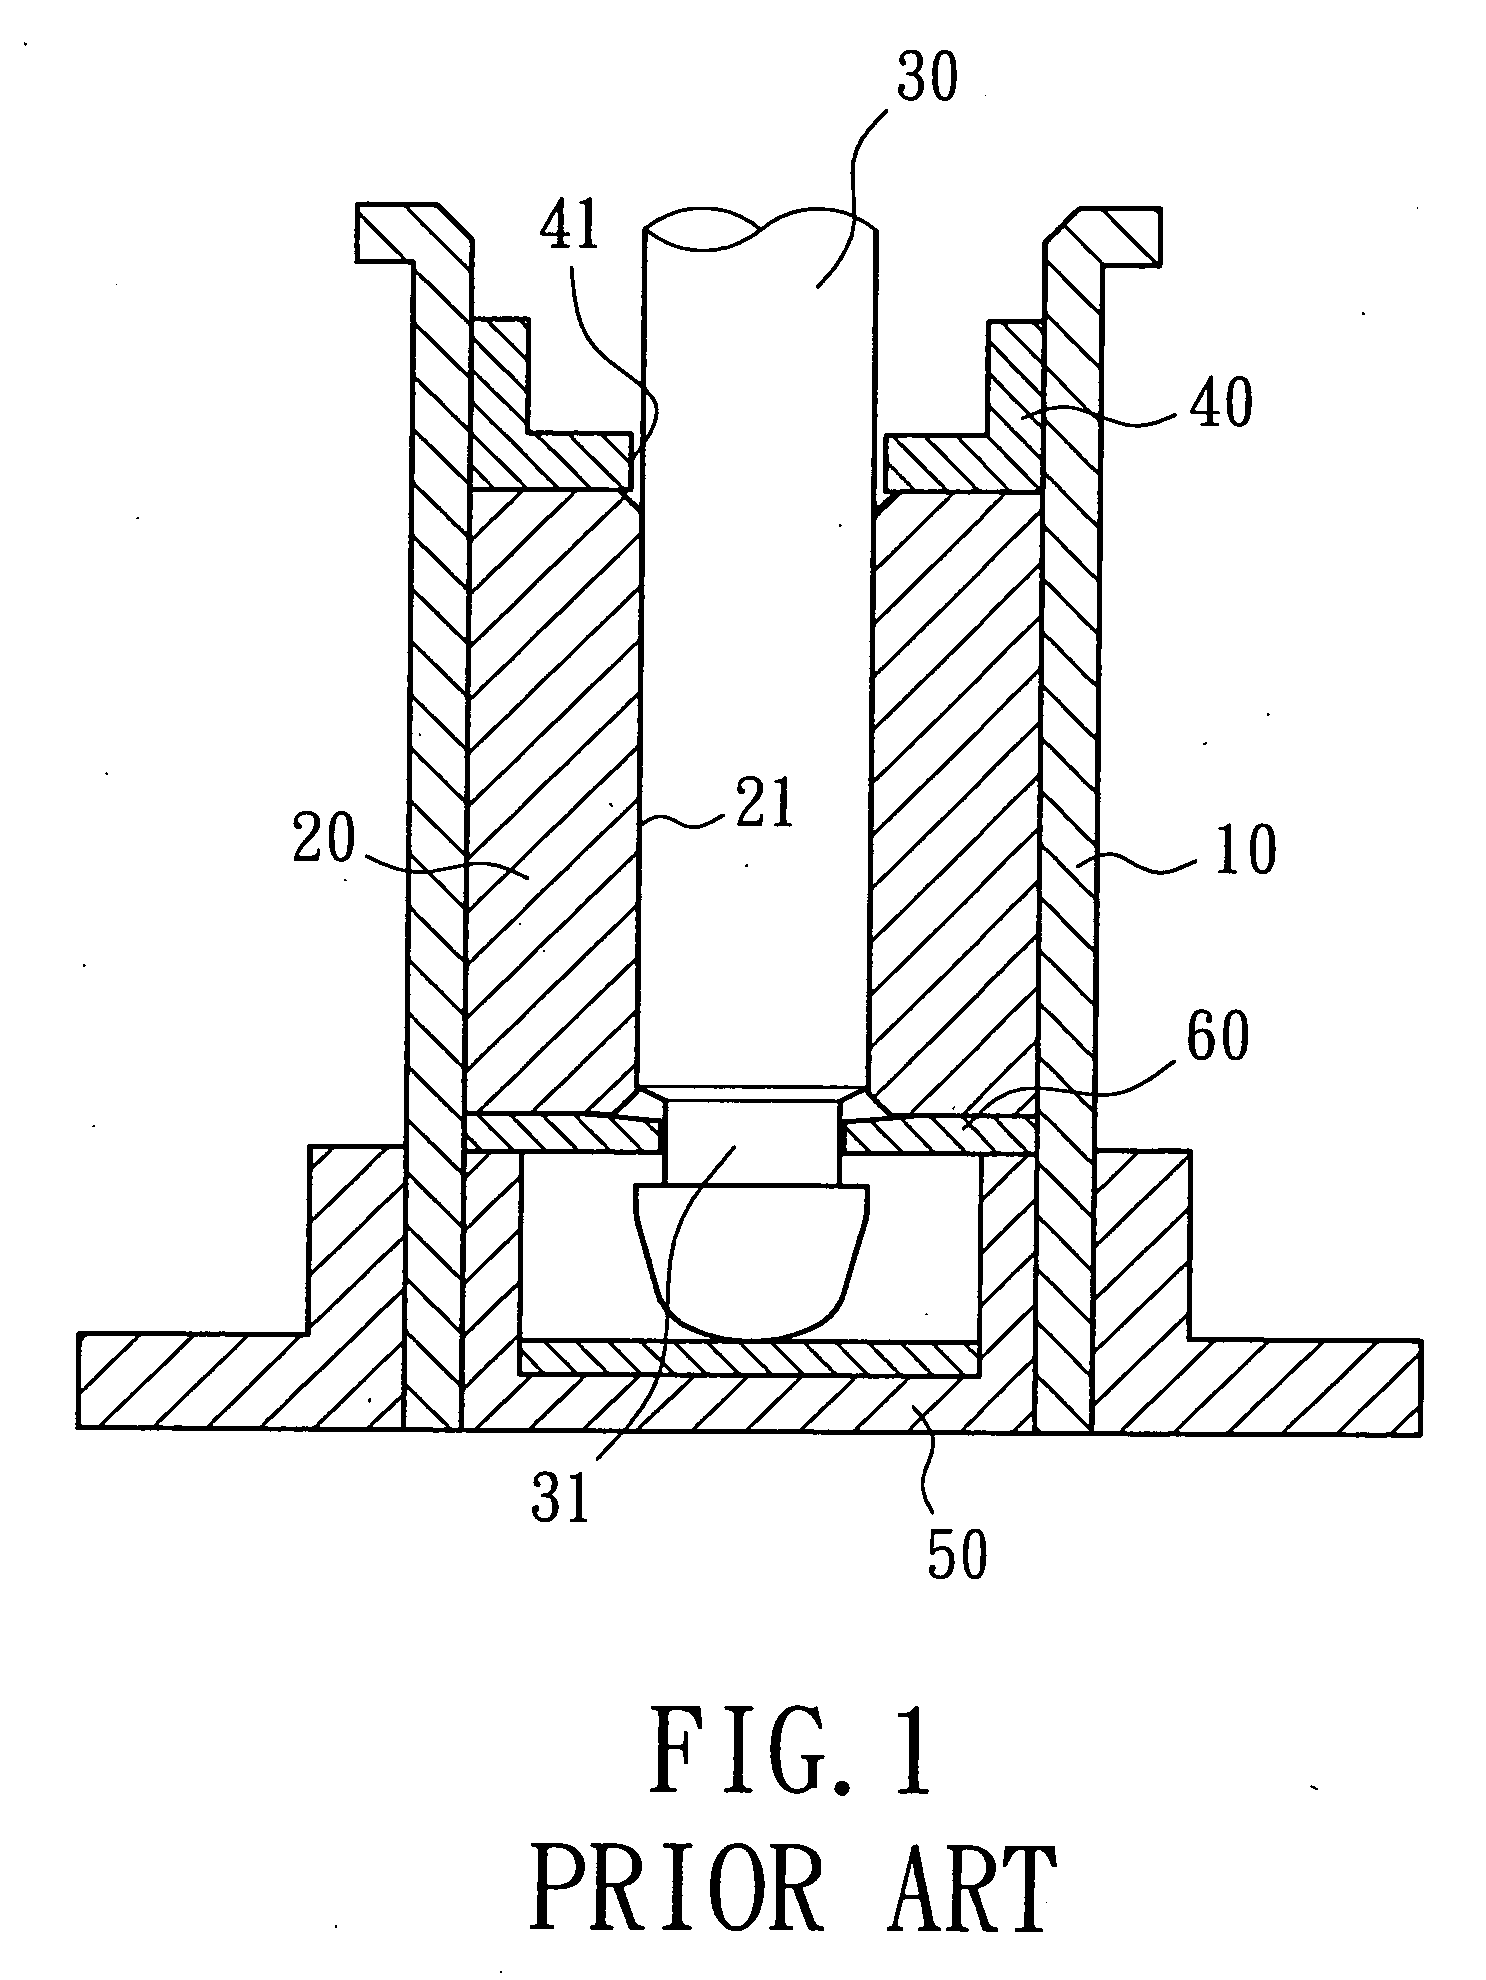 Positioning ring structure for motor